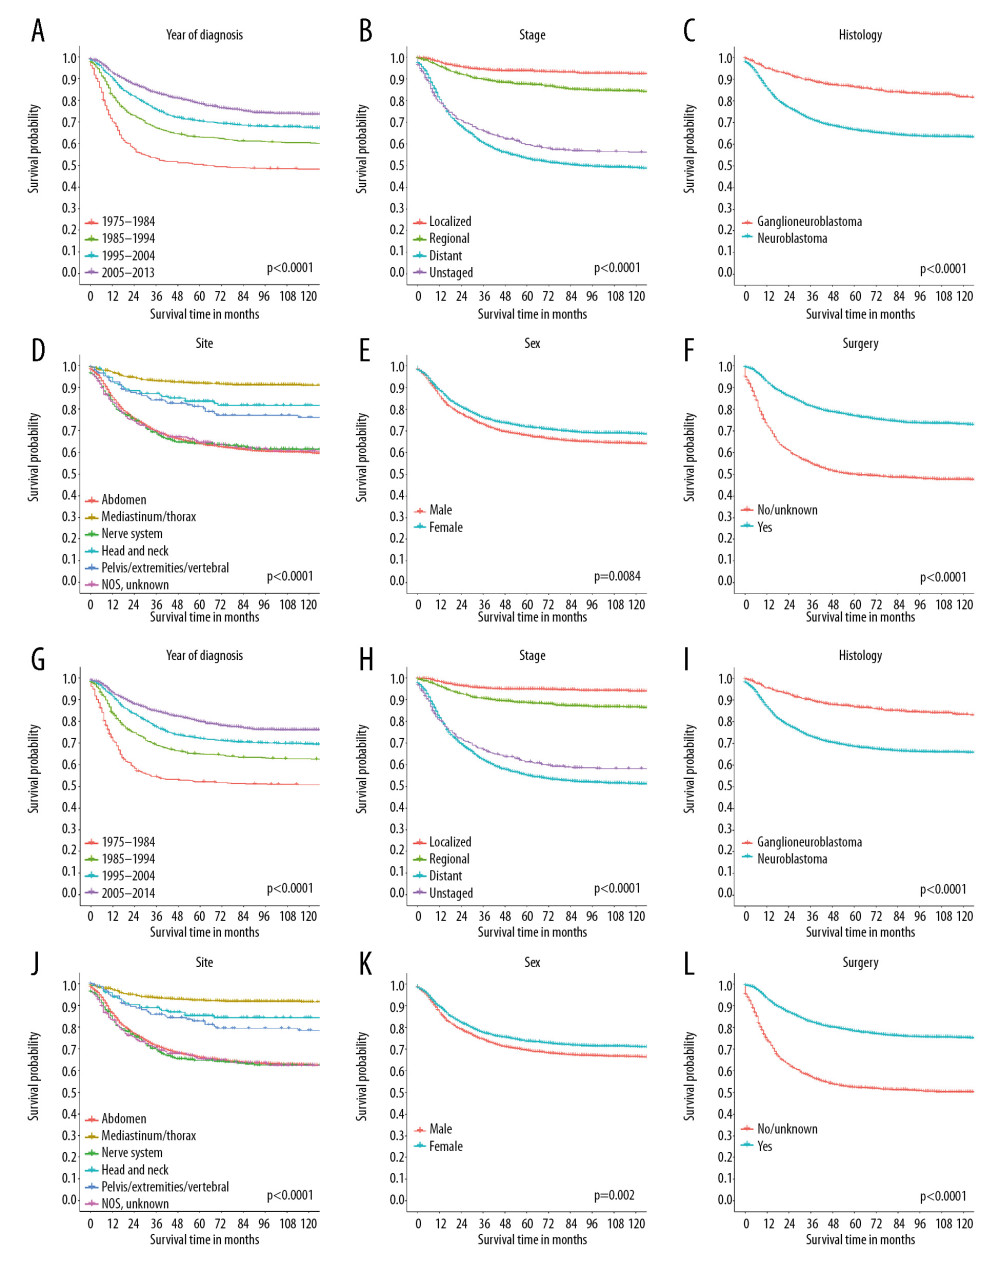 Kaplan-Meier curves of overall survival (A–F) and cancer-specific survival (G–L) for neuroblastoma patients, stratified by year of diagnosis (A, G), stage (B, H), histology (C, I), primary site (D, J), sex (E, K), and the administration of surgery (C, L).